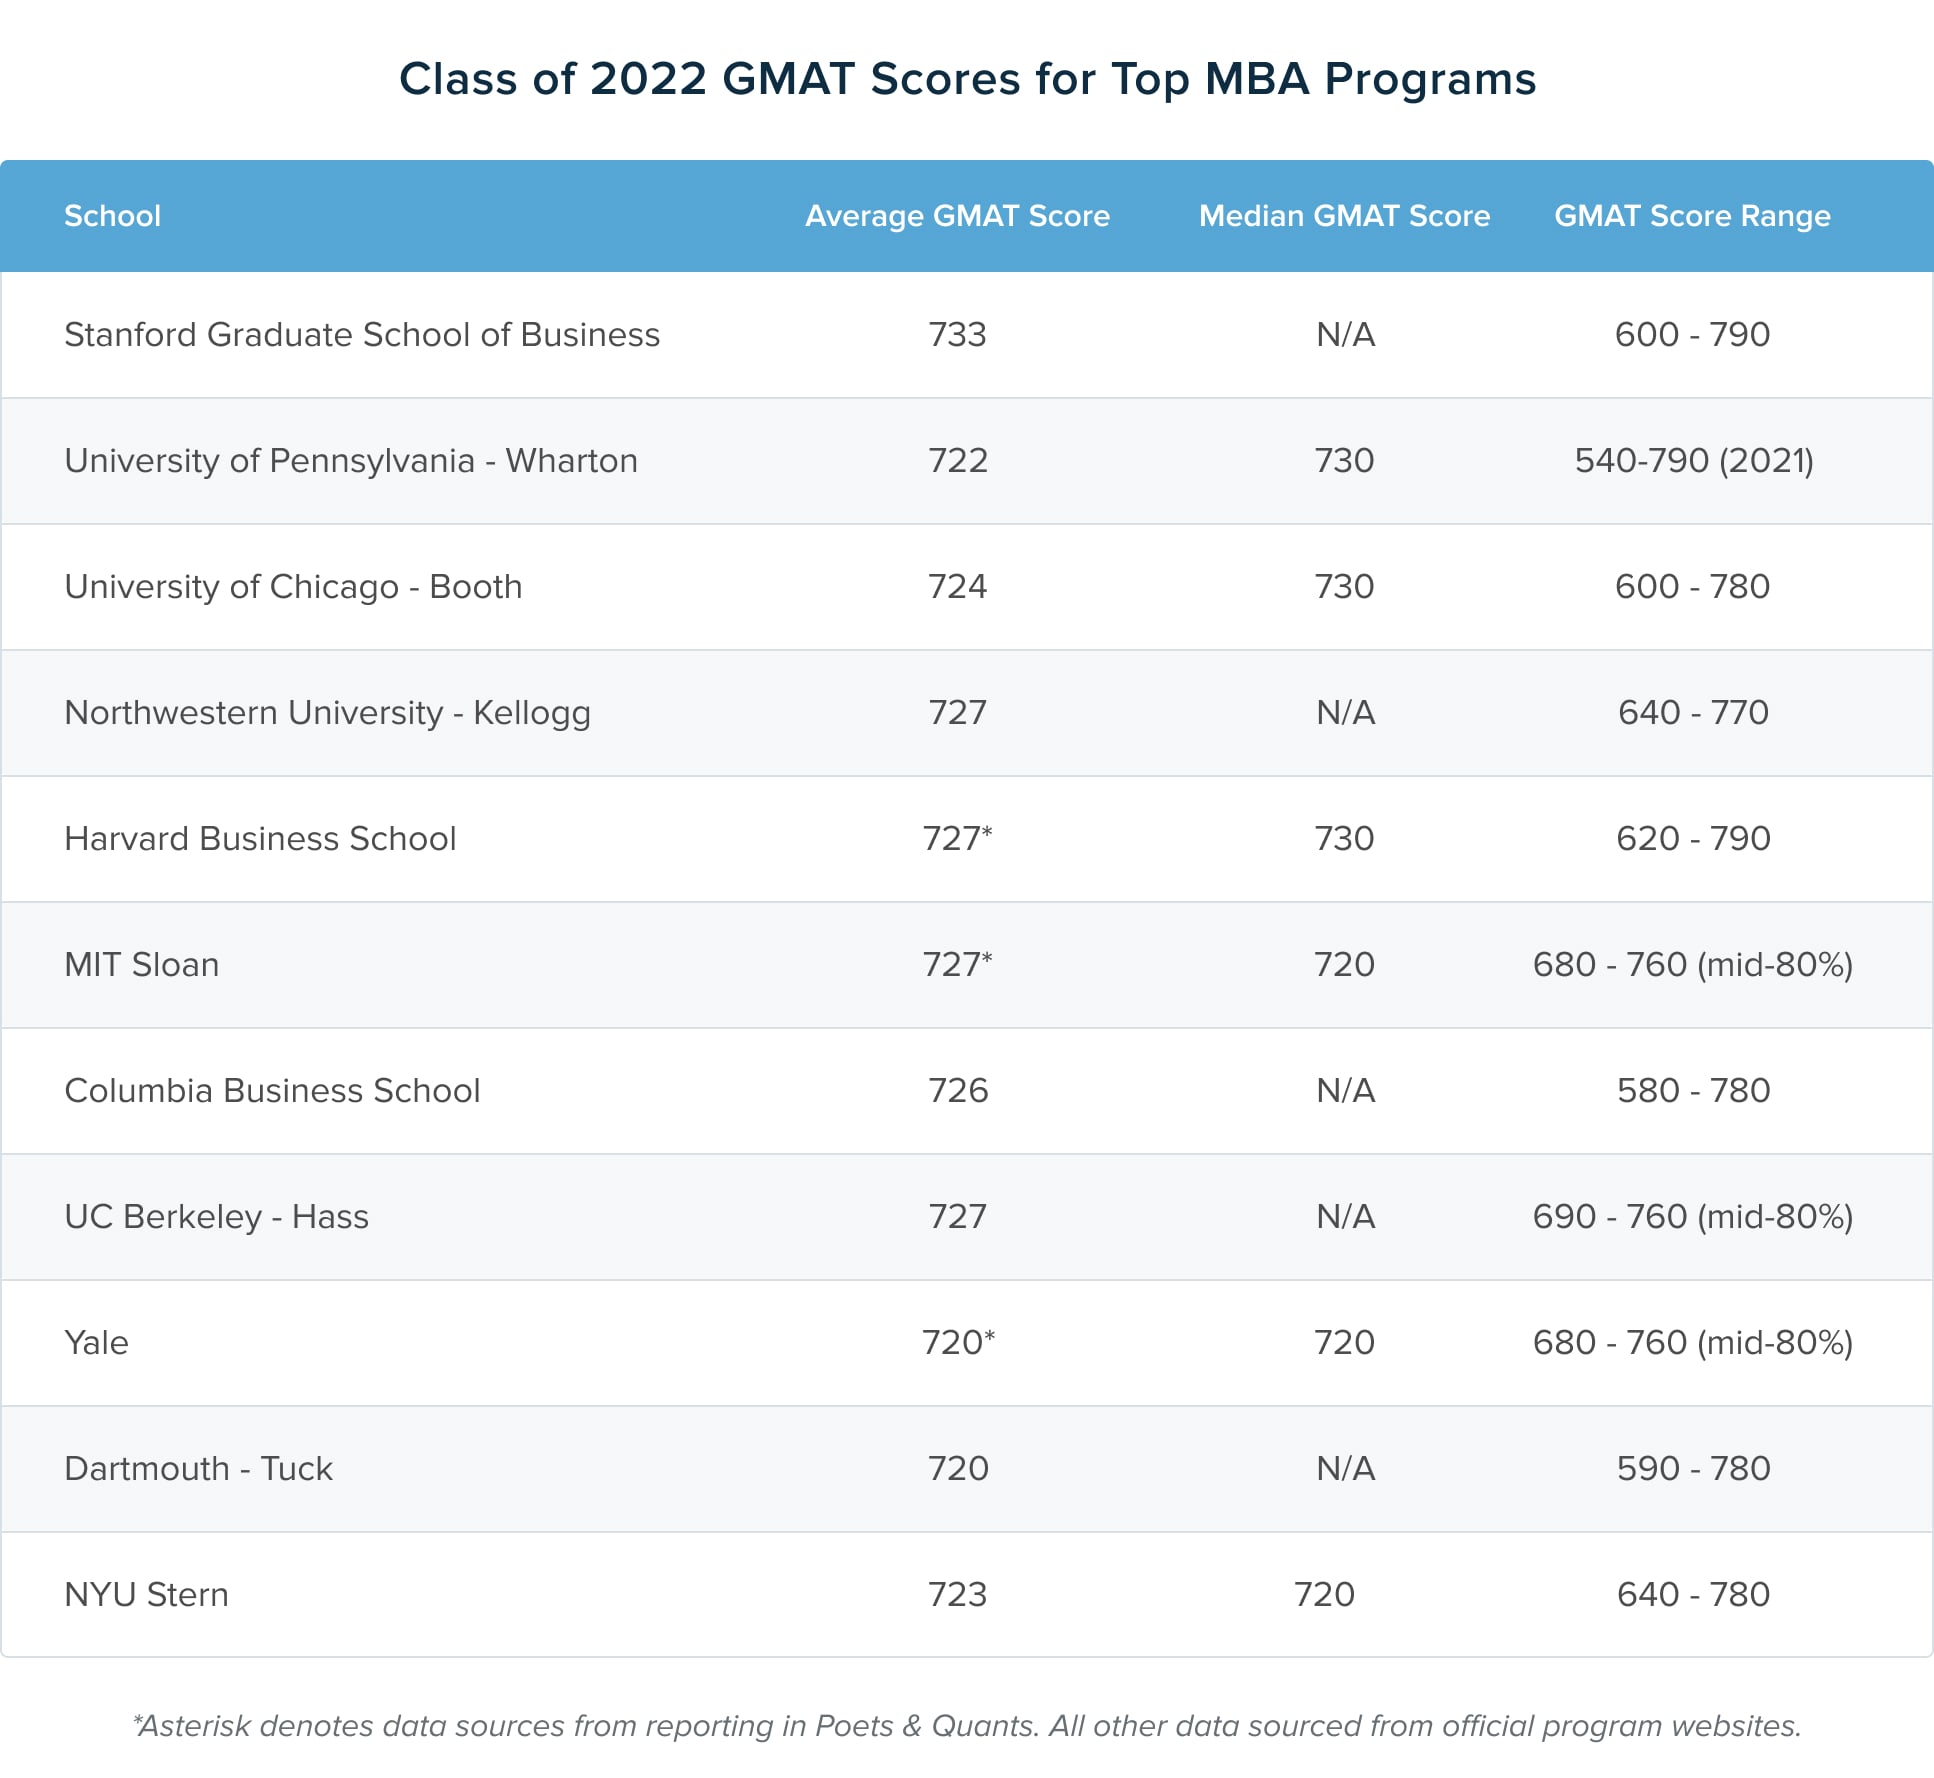 The greatest business schools' GMAT scores over a five-year period